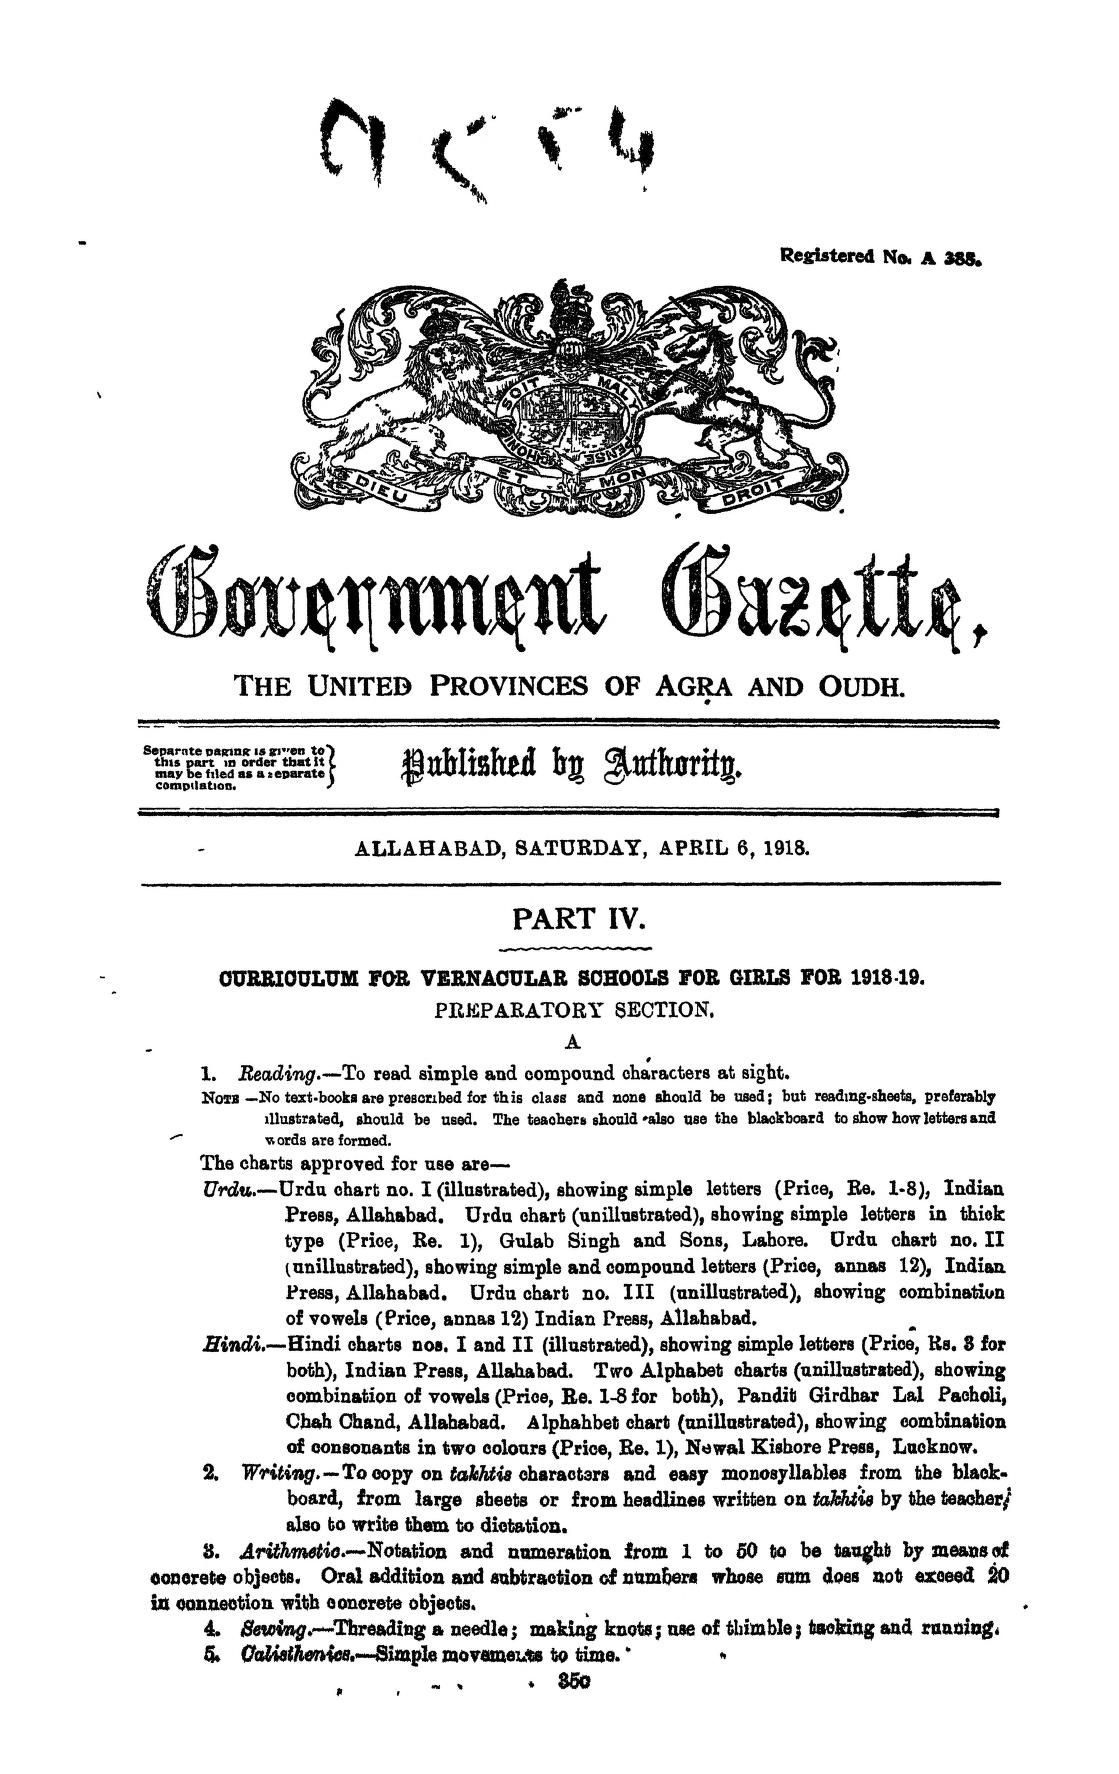 Government Gazette The United Provinces Of Agra And Oudh, April 6 